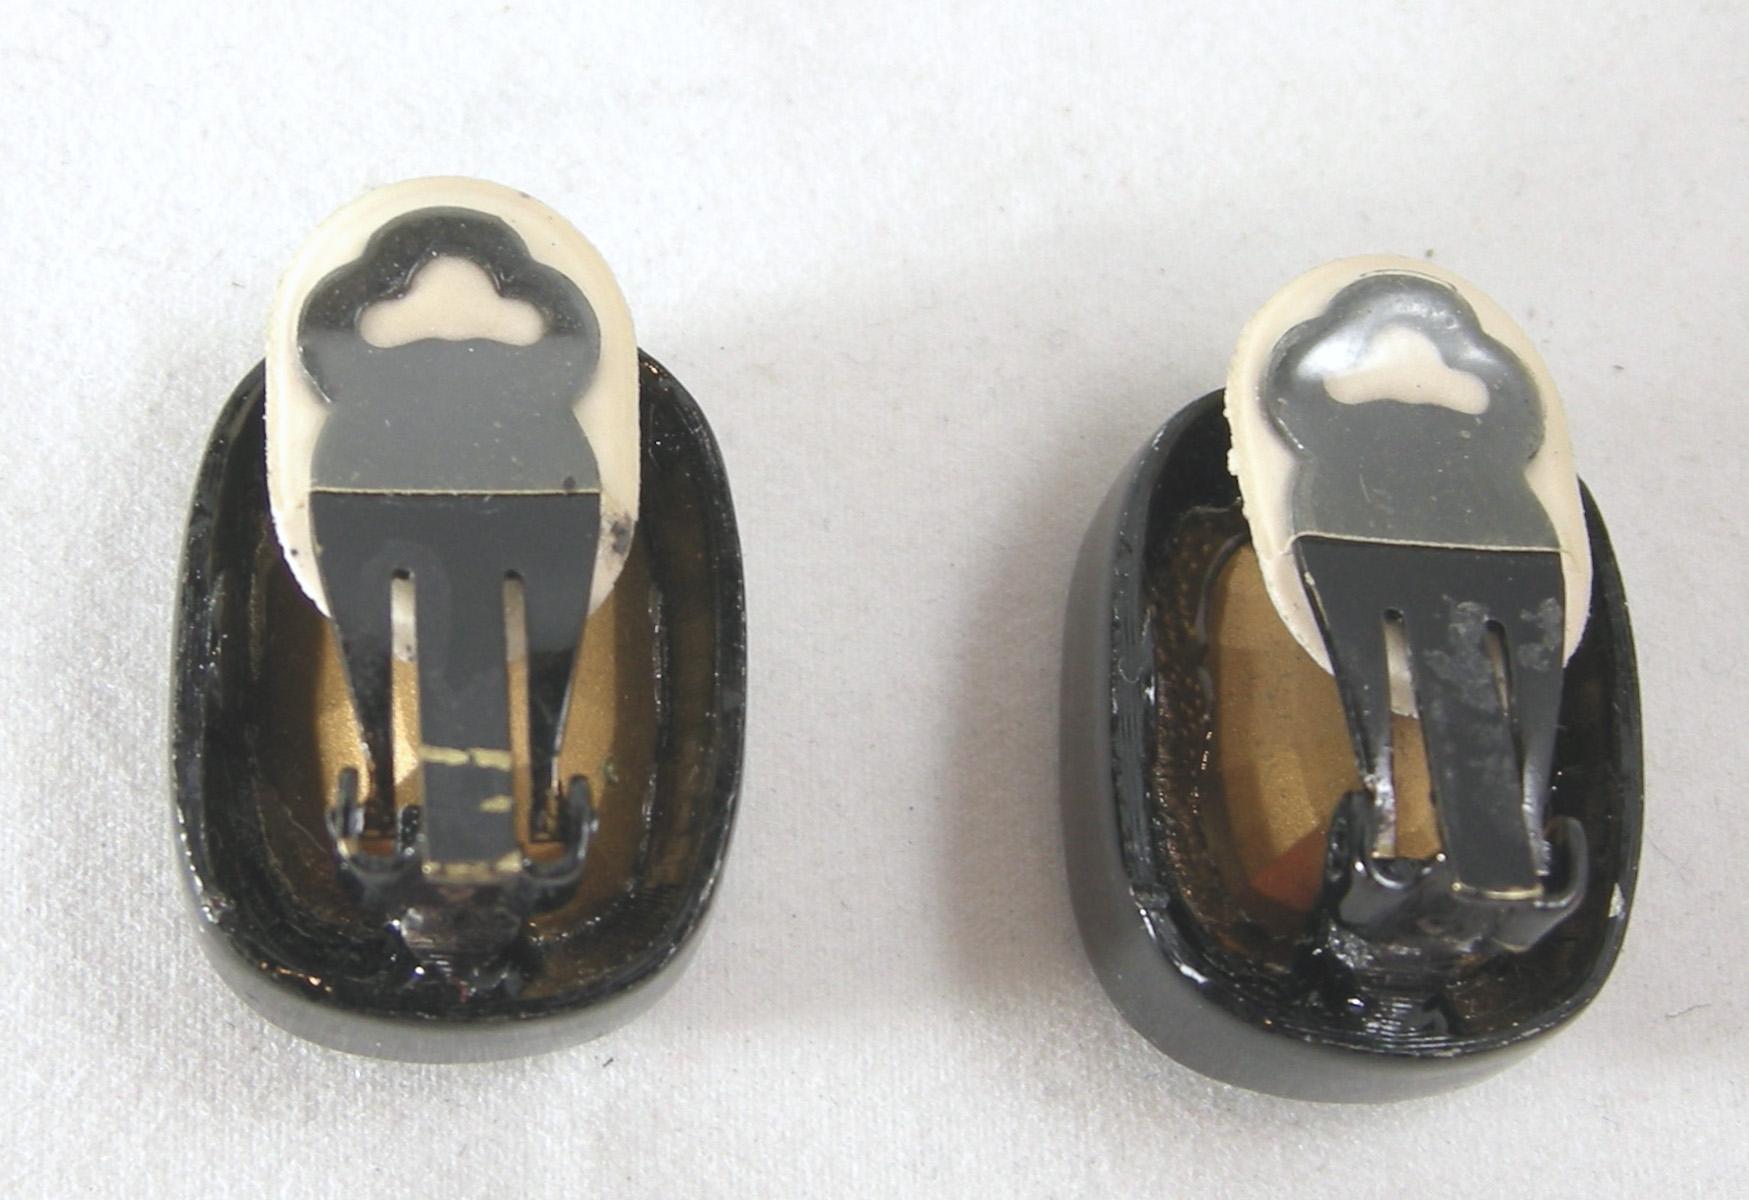 These vintage Kenneth Jay Lane clip earrings are known as “headlight earrings”.  They have a large crystal center set in black enamel.  They measure 1” long x 3/4” wide.  They are signed “Kenneth Lane” and in excellent condition. 